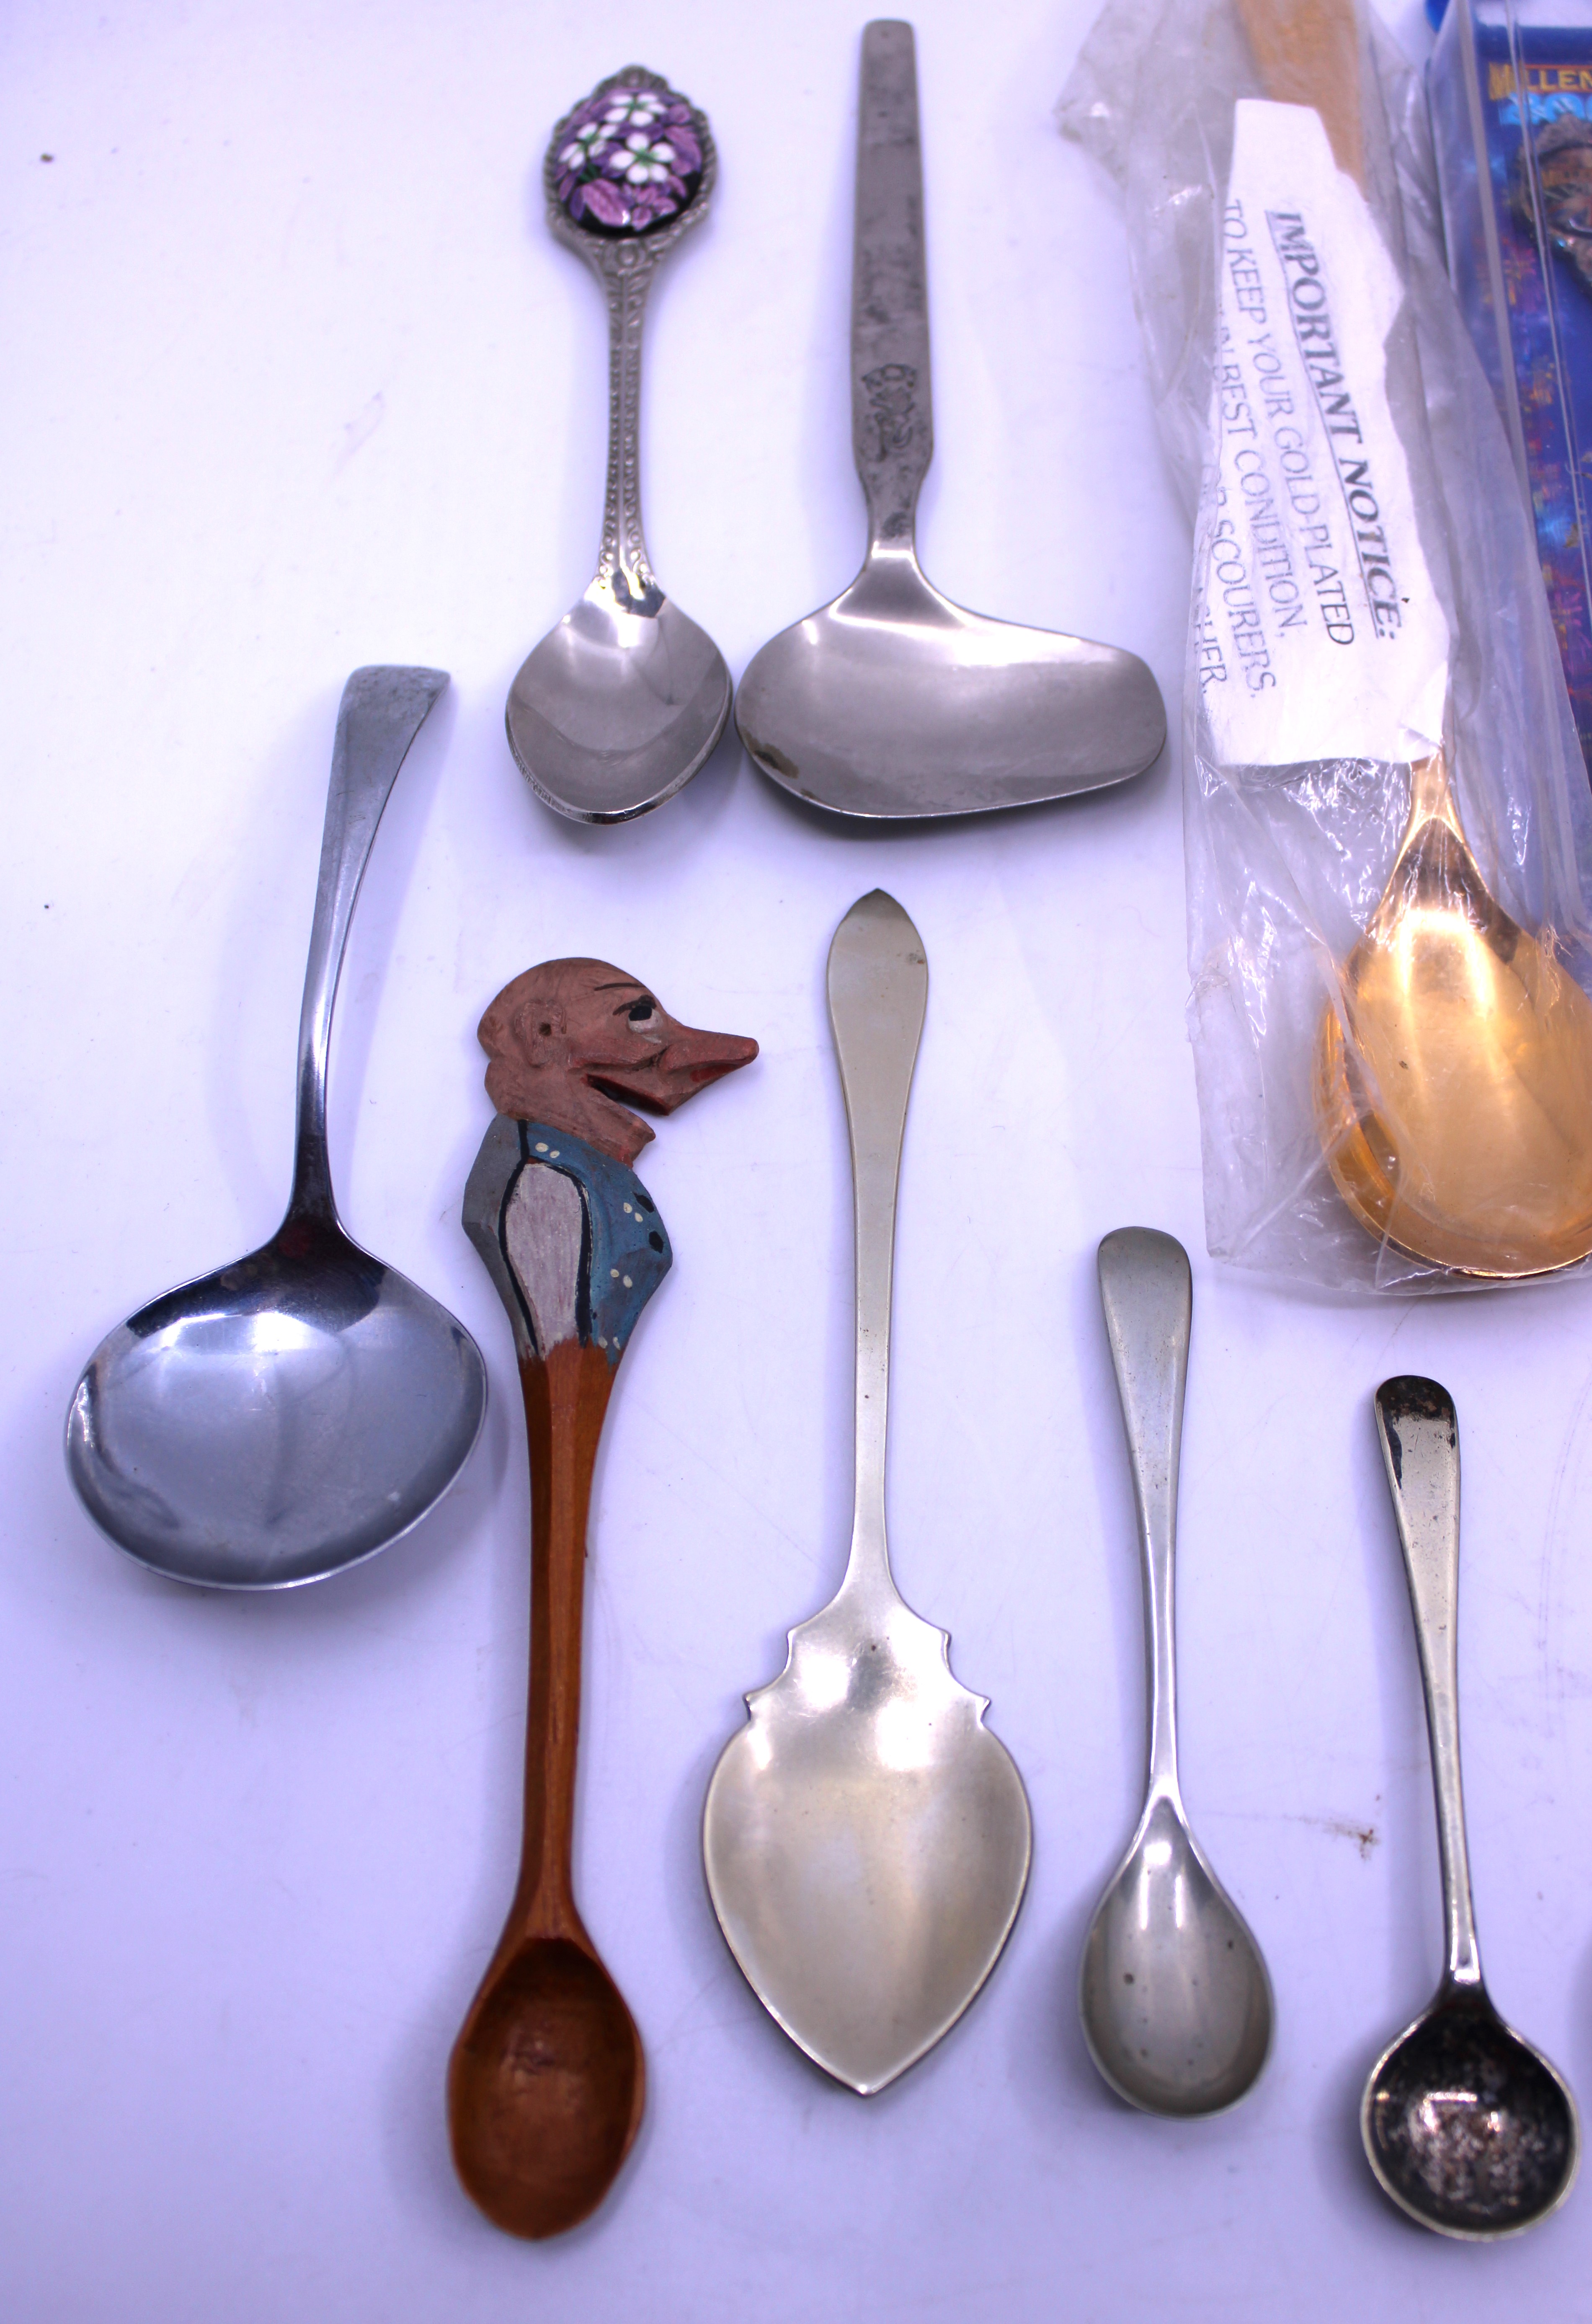 Selection of Sterling Silver. Approx. 41 grams and a Collection of Silver Plated Spoons to - Image 3 of 4